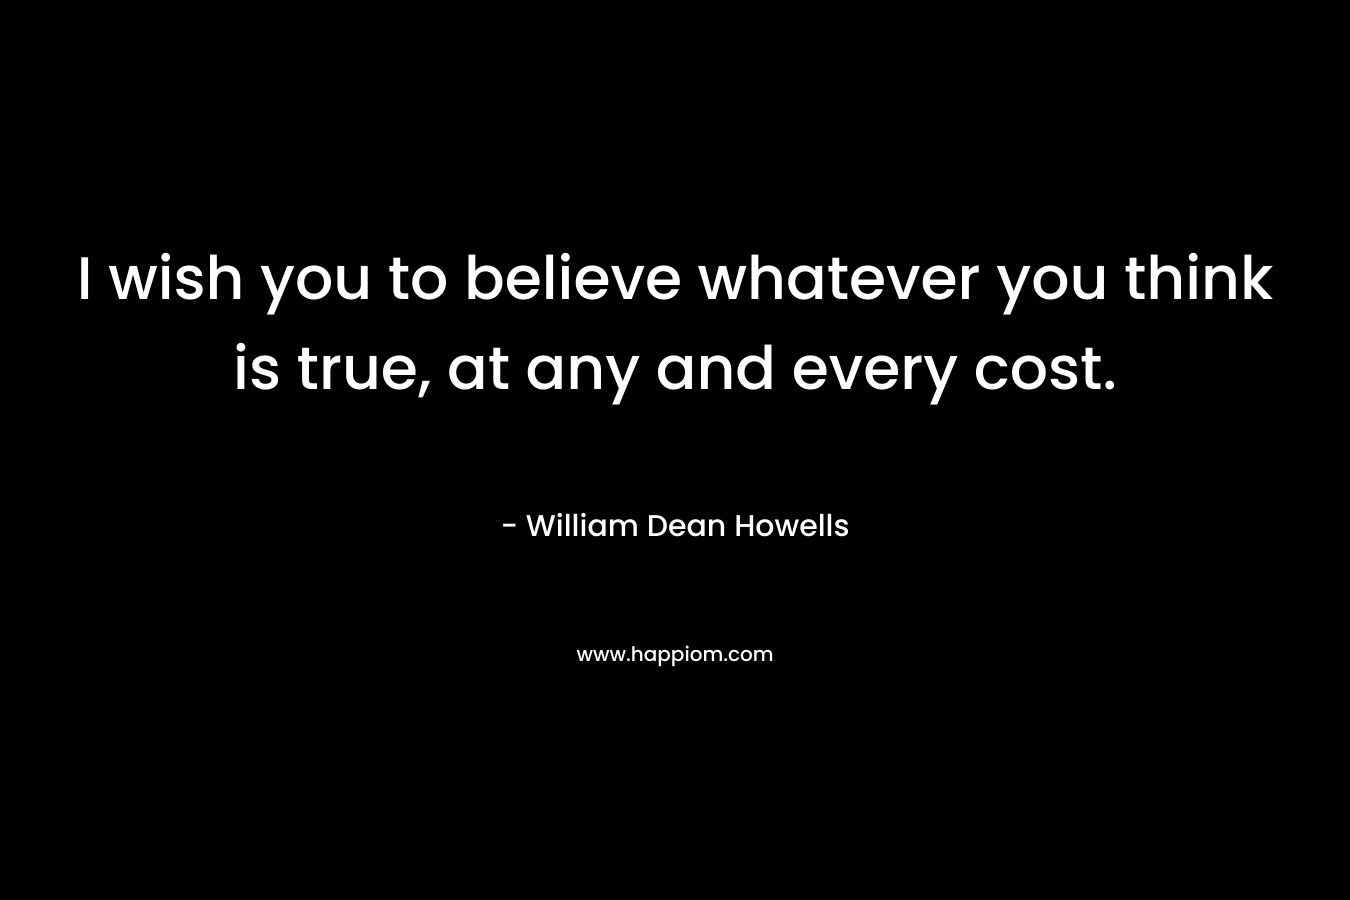 I wish you to believe whatever you think is true, at any and every cost.